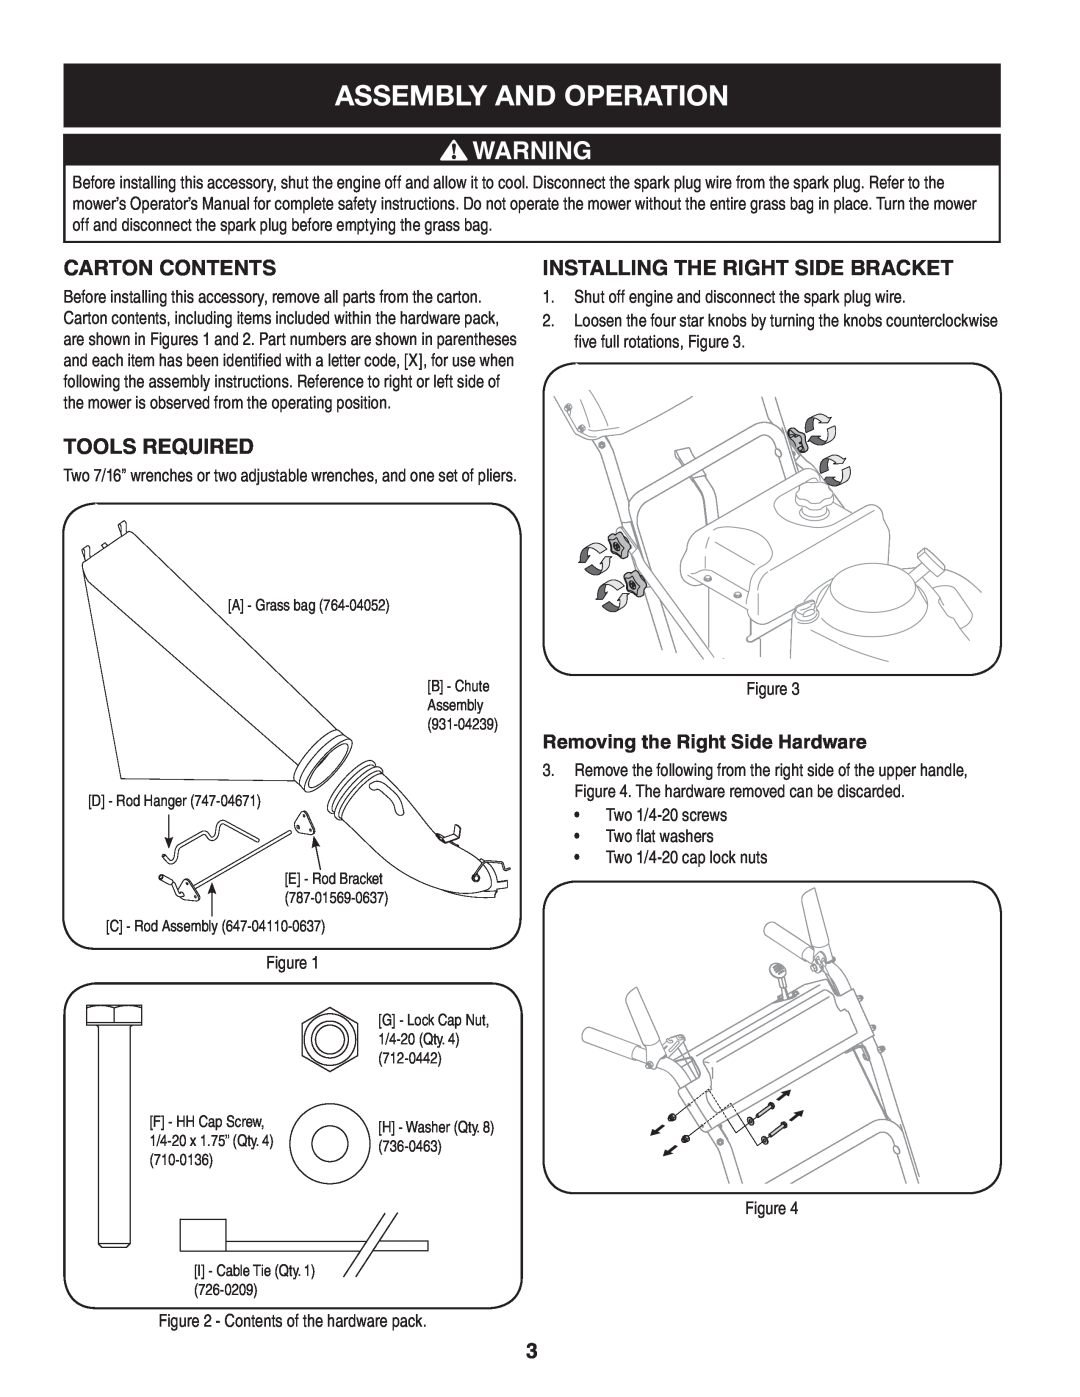 Craftsman 33731 manual Assembly And Operation, Carton CONTENTS, TOOLS required, Installing the RIGHT Side Bracket 